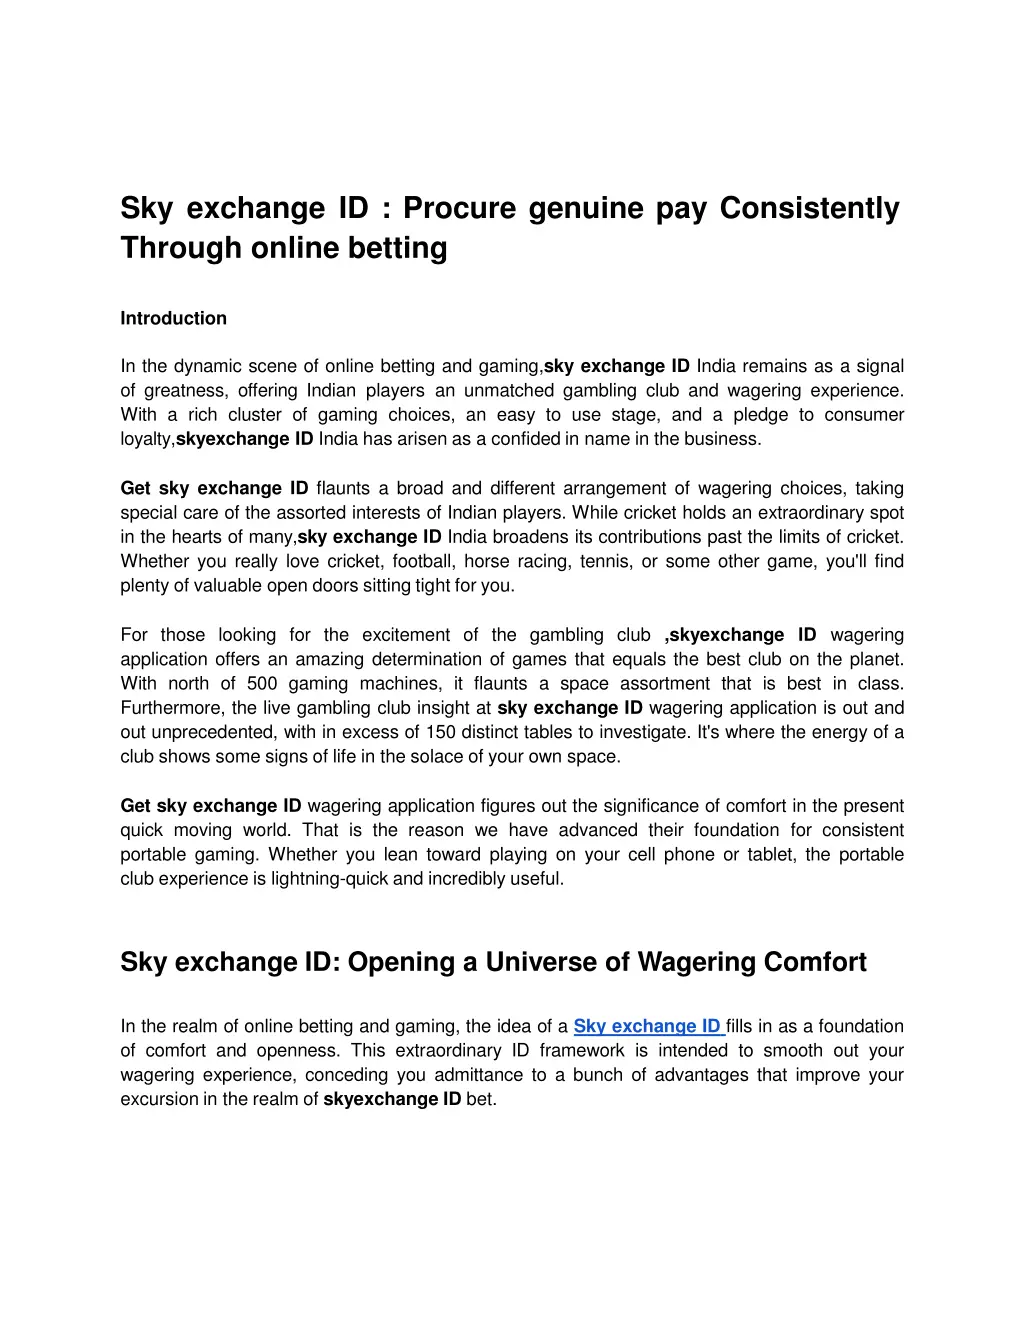 sky exchange id procure genuine pay consistently